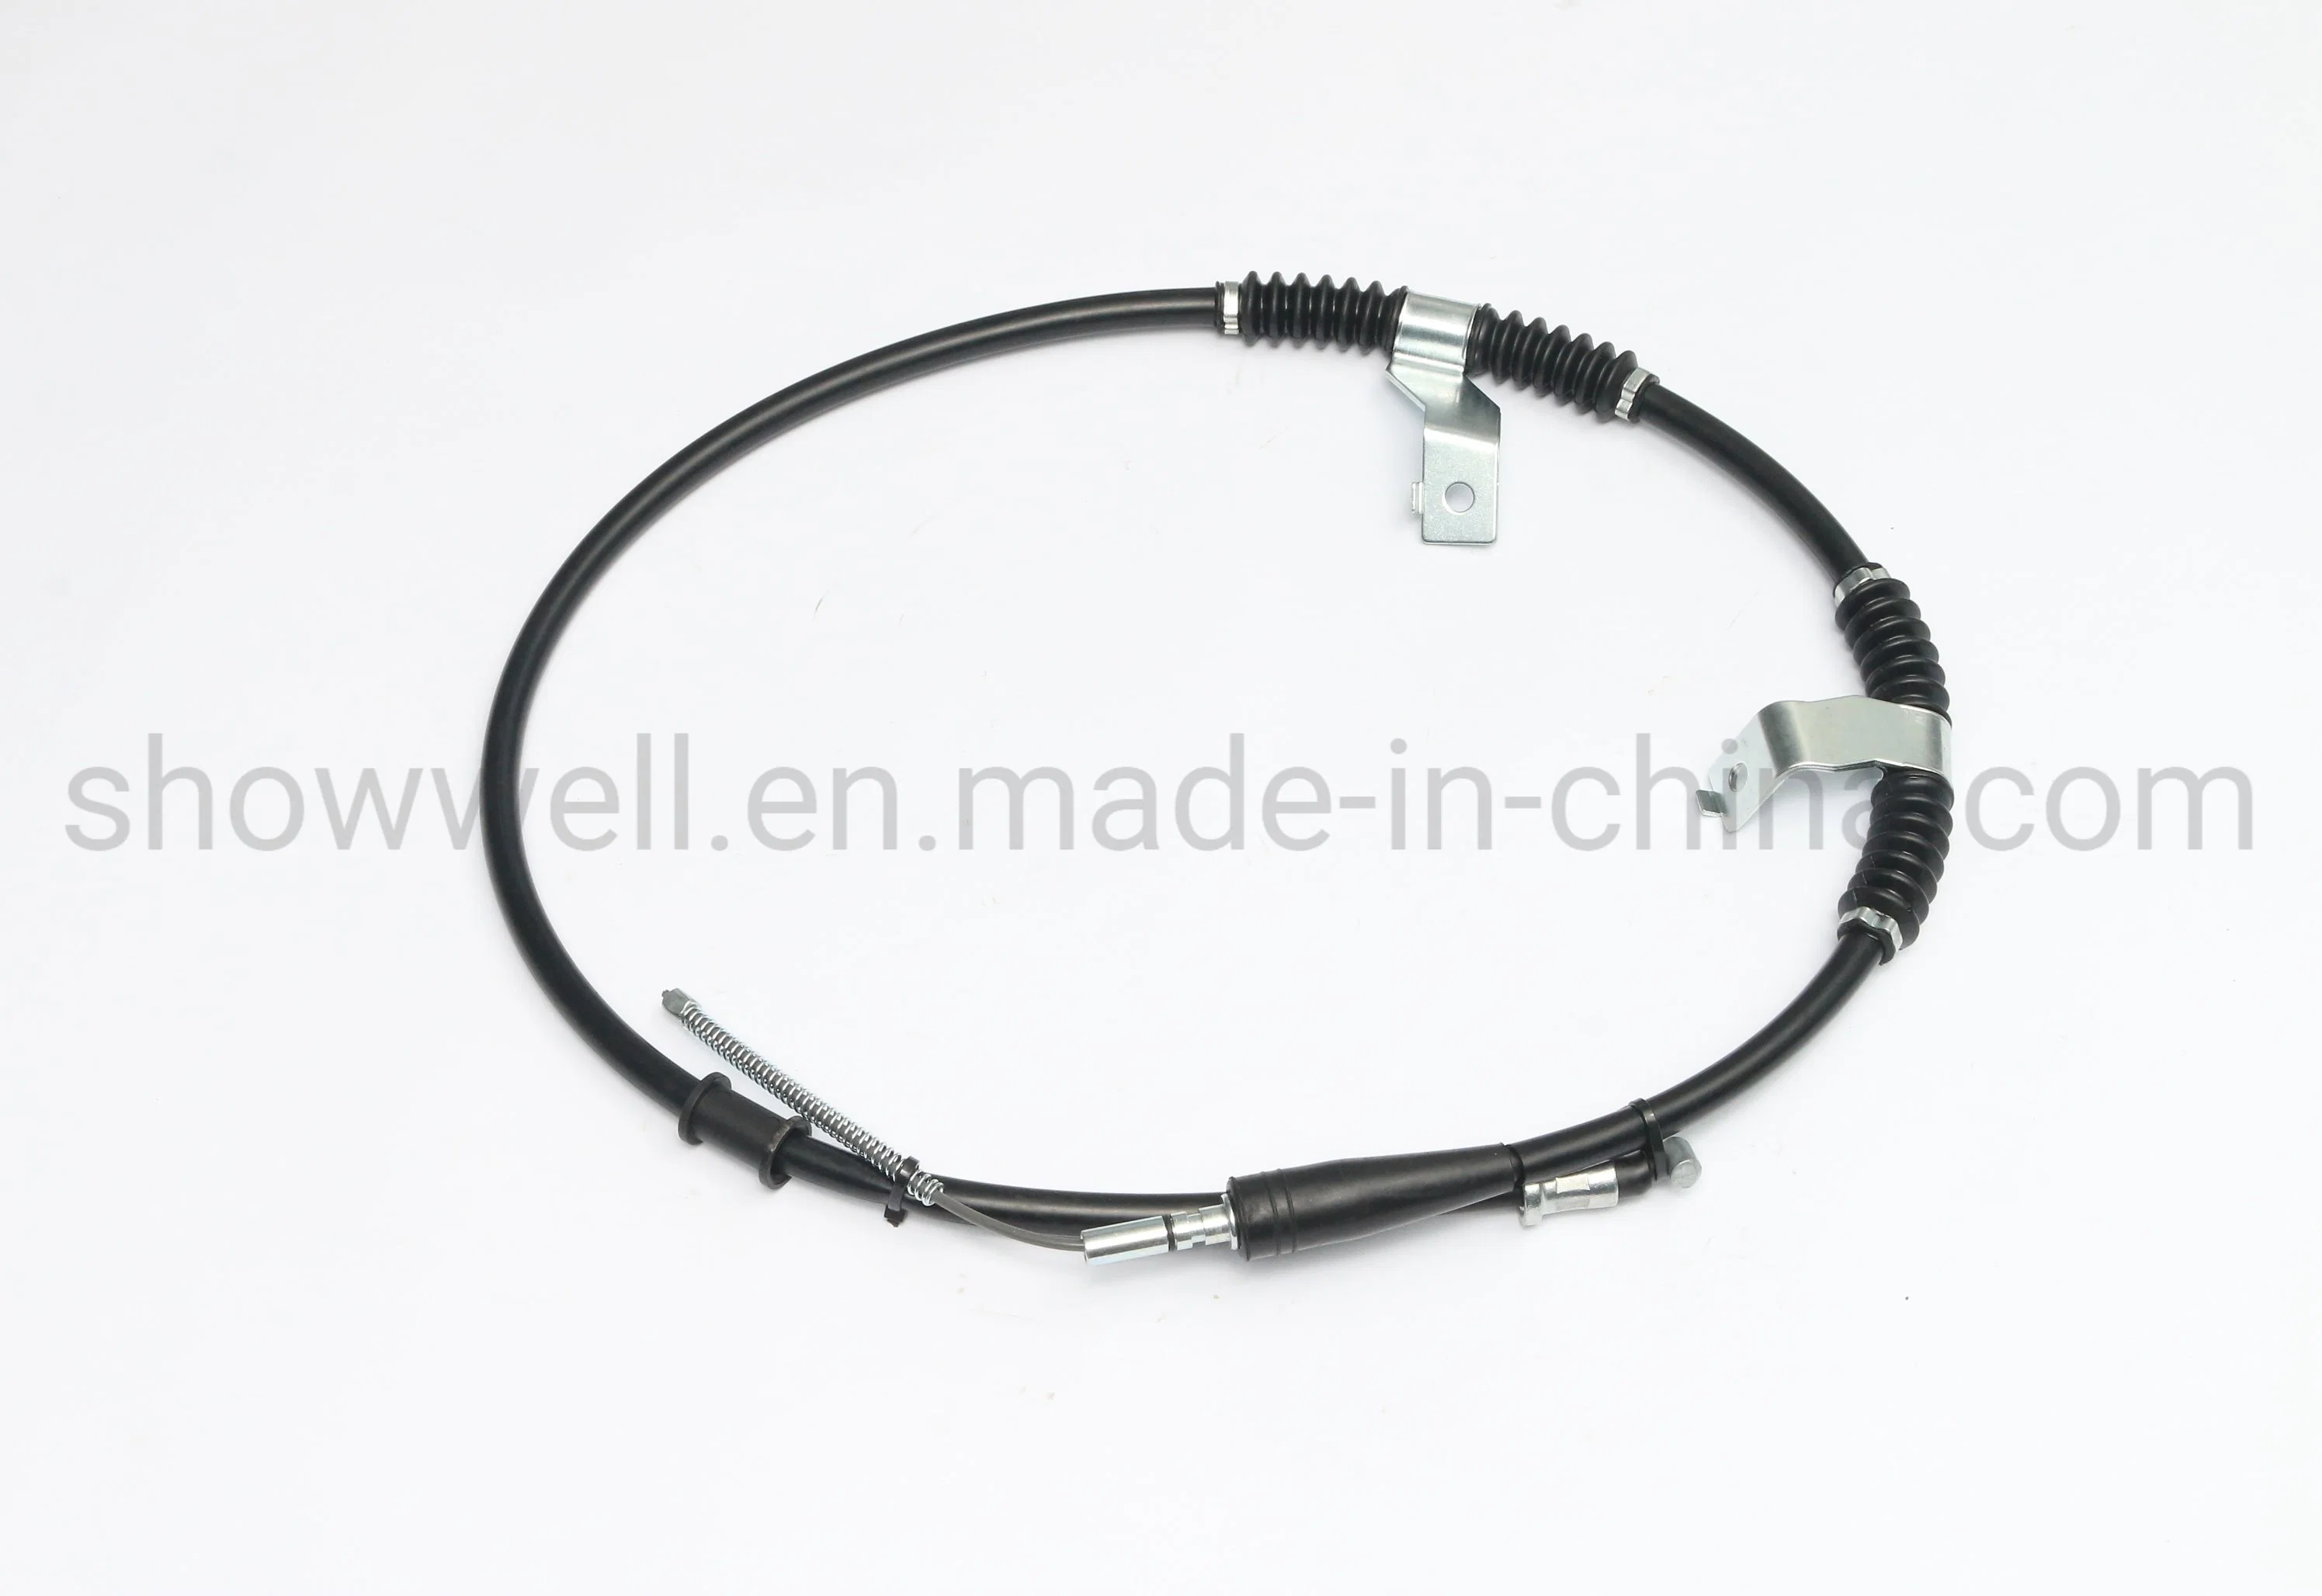 Customized/Wire Harness/Automotive Replacement Hand Brake Cable for Saic GM Excelle